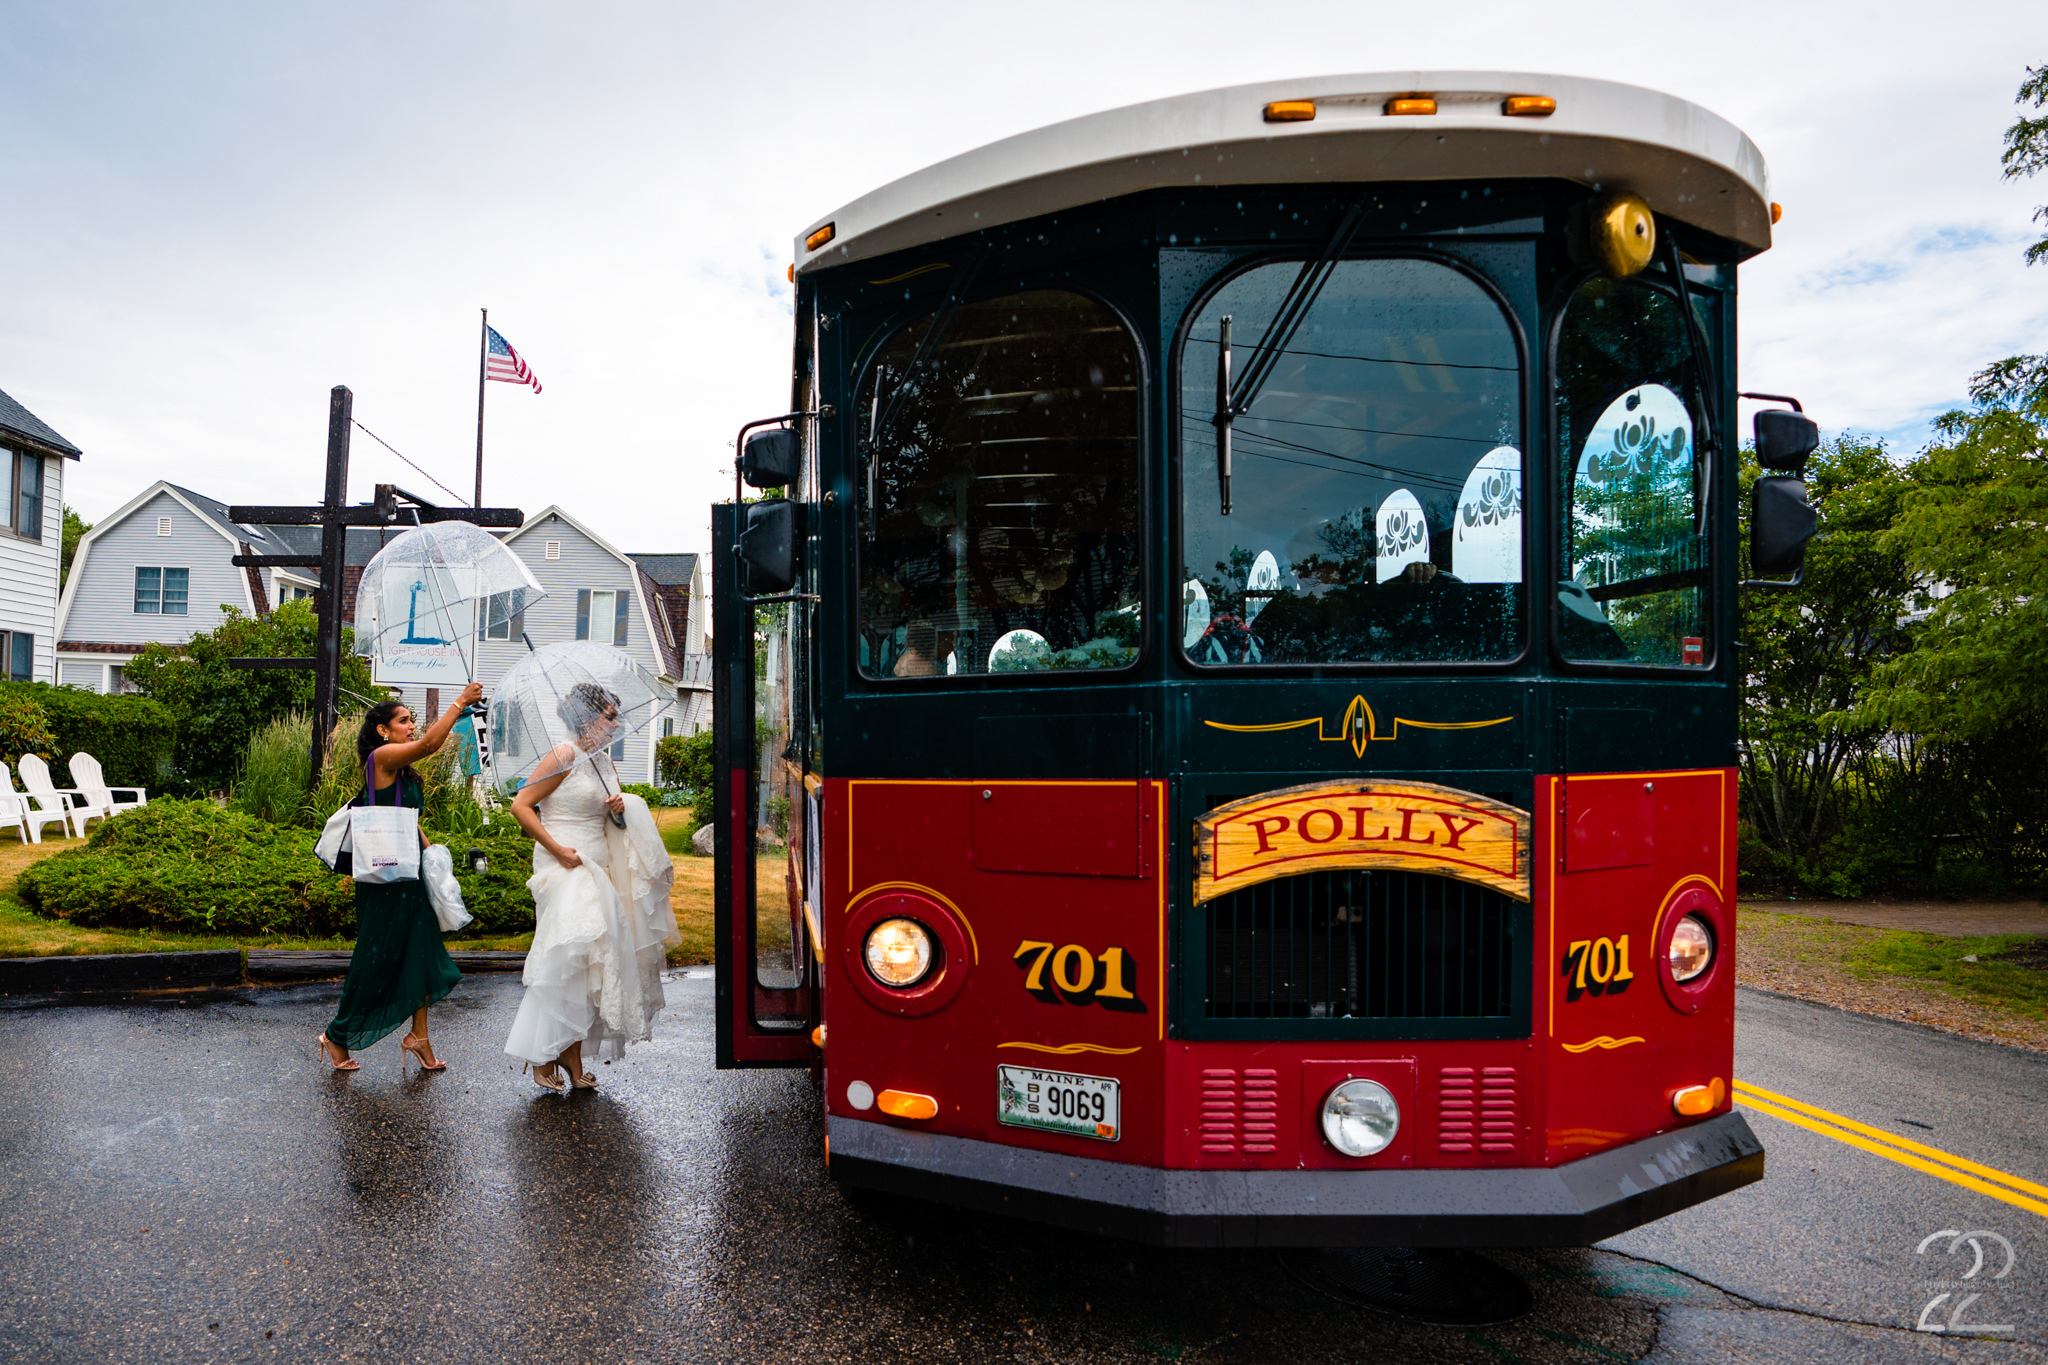  Choosing something out of the ordinary for your wedding makes it uniquely yours. Andrea rented a trolly to bring them to the York Golf & Tennis Club for their wedding. It was so much fun for everyone. 